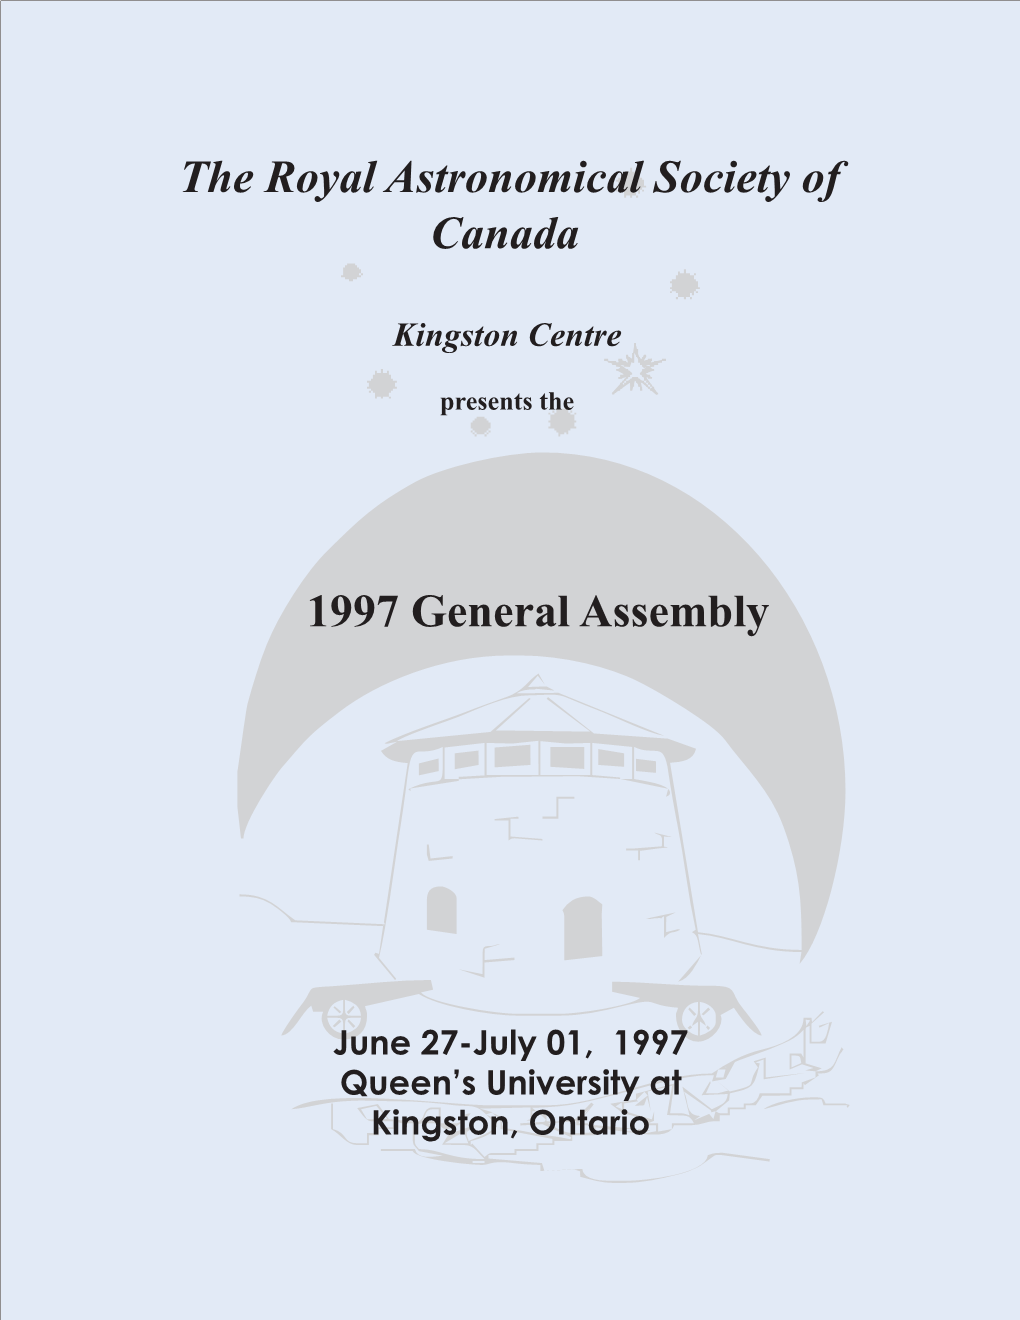 The Royal Astronomical Society of Canada 1997 General Assembly